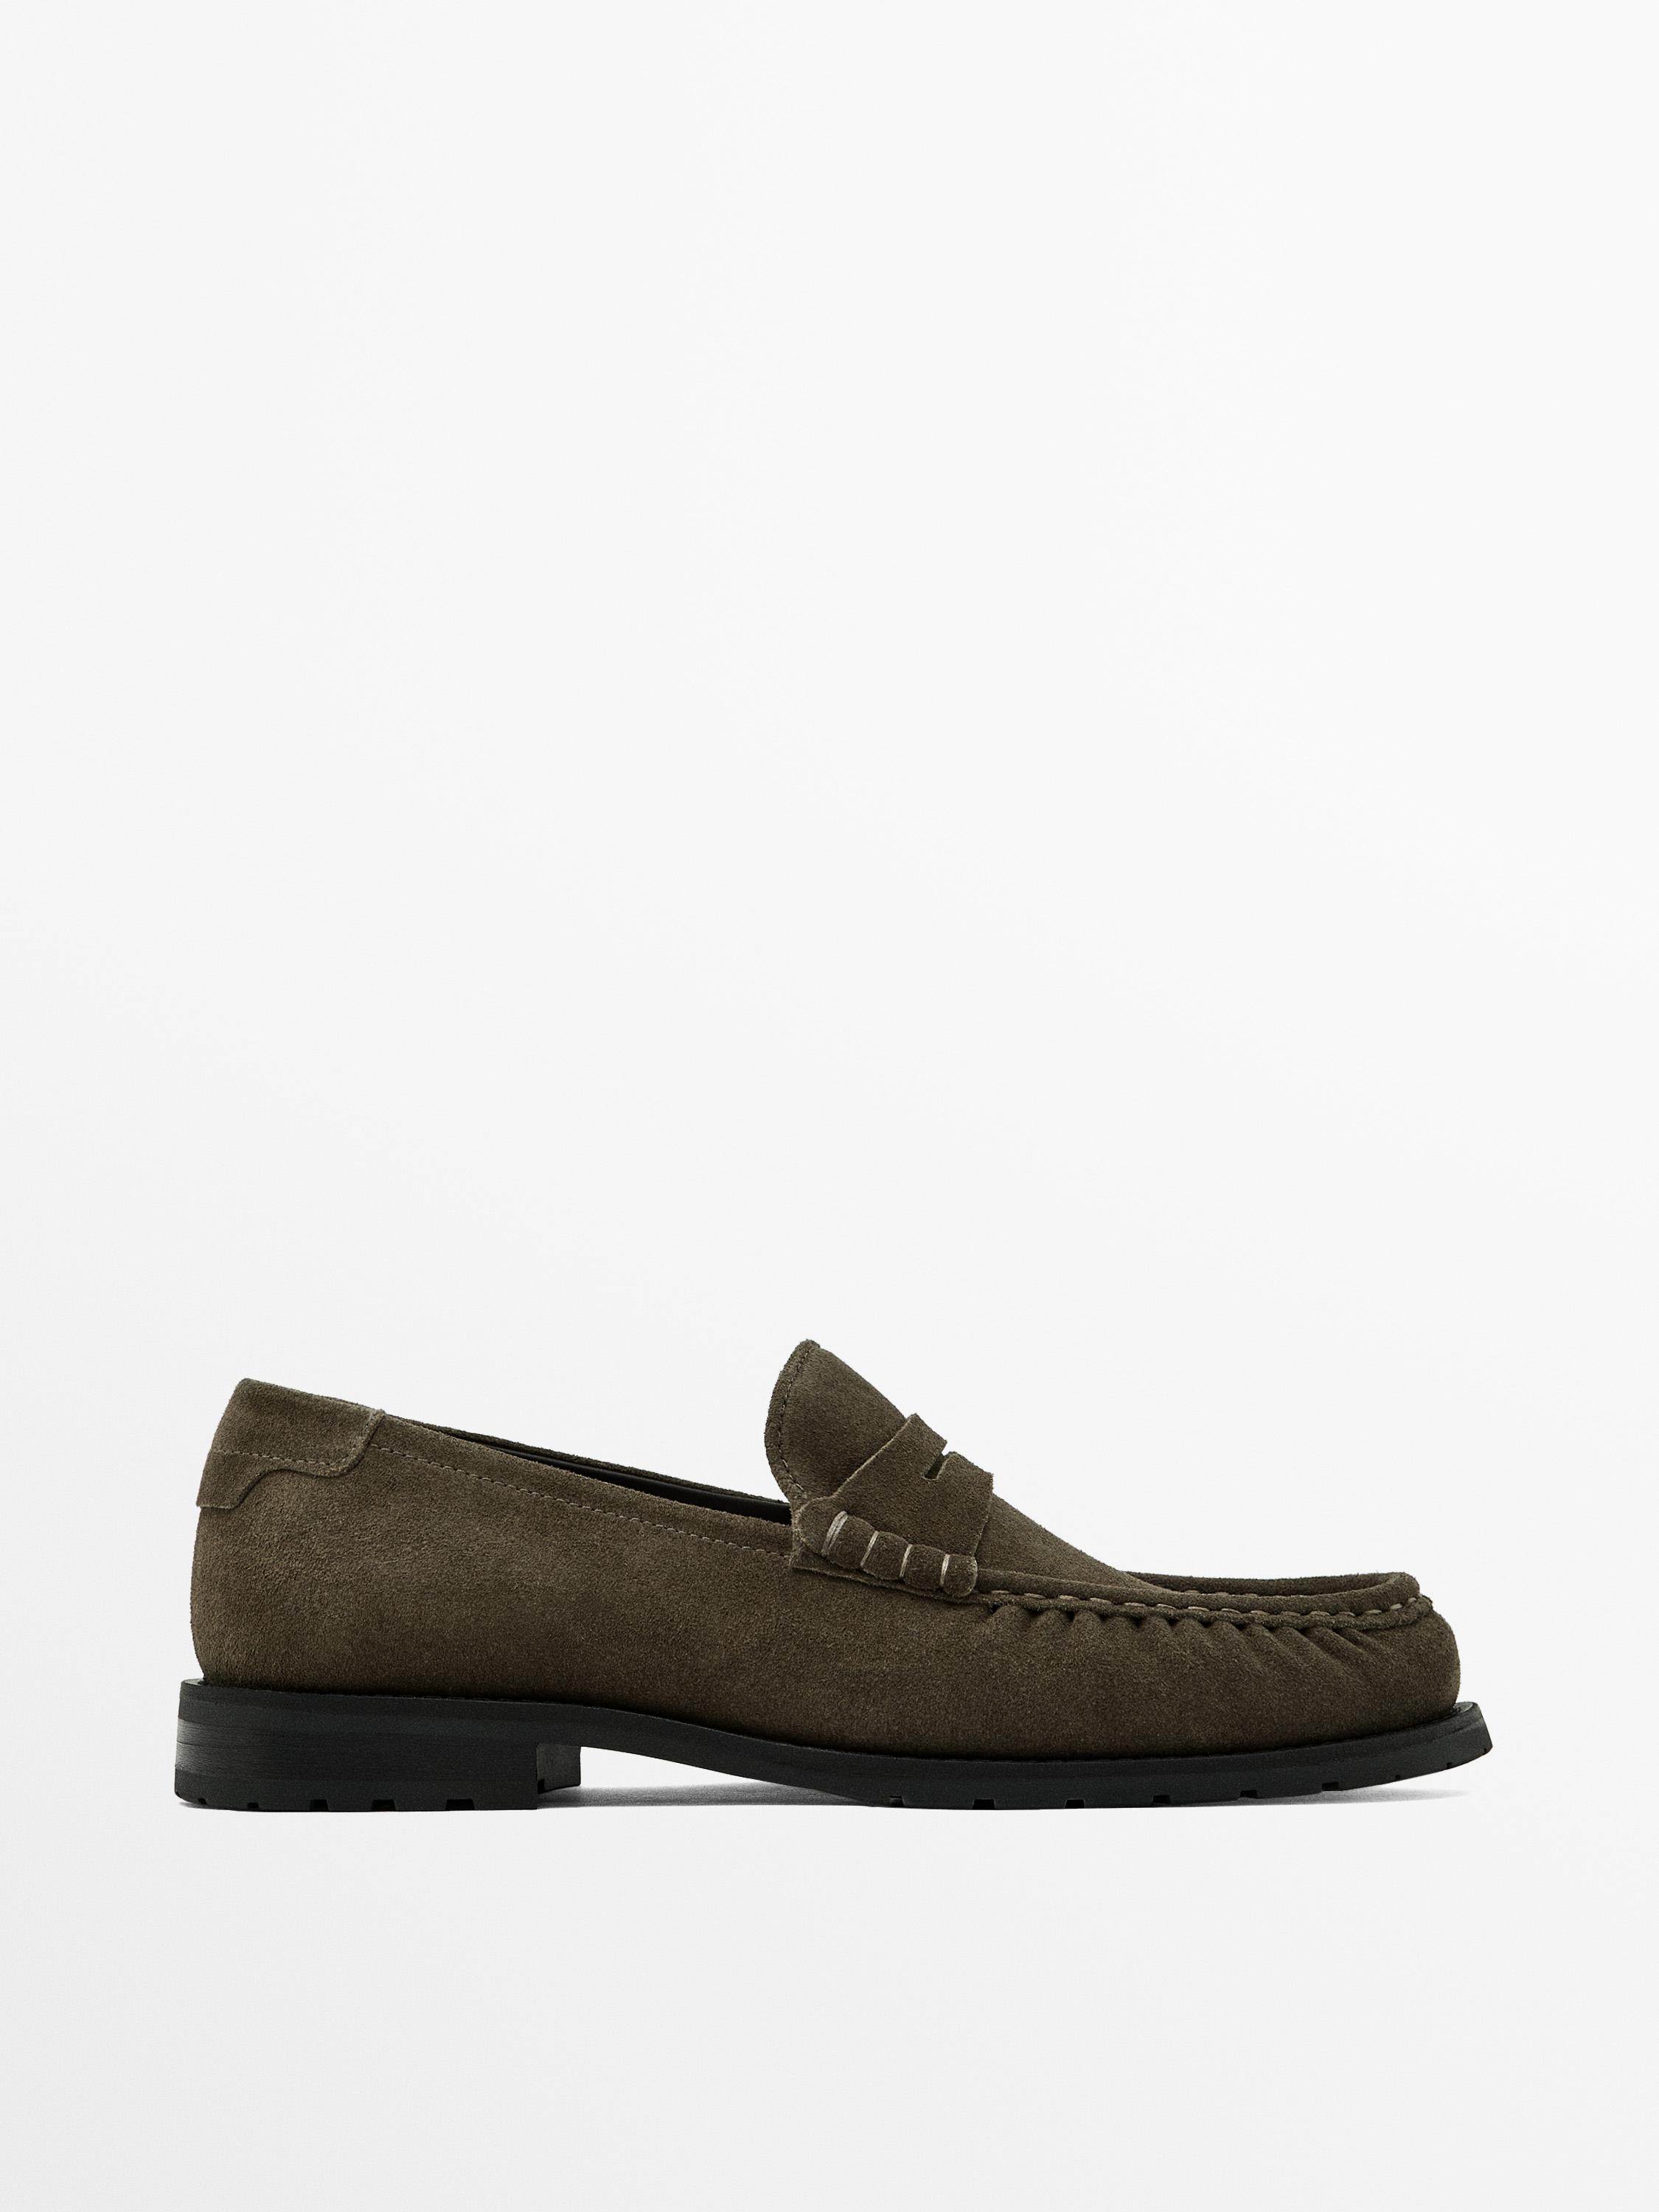 Split suede leather loafers - Mink Gray | ZARA United States